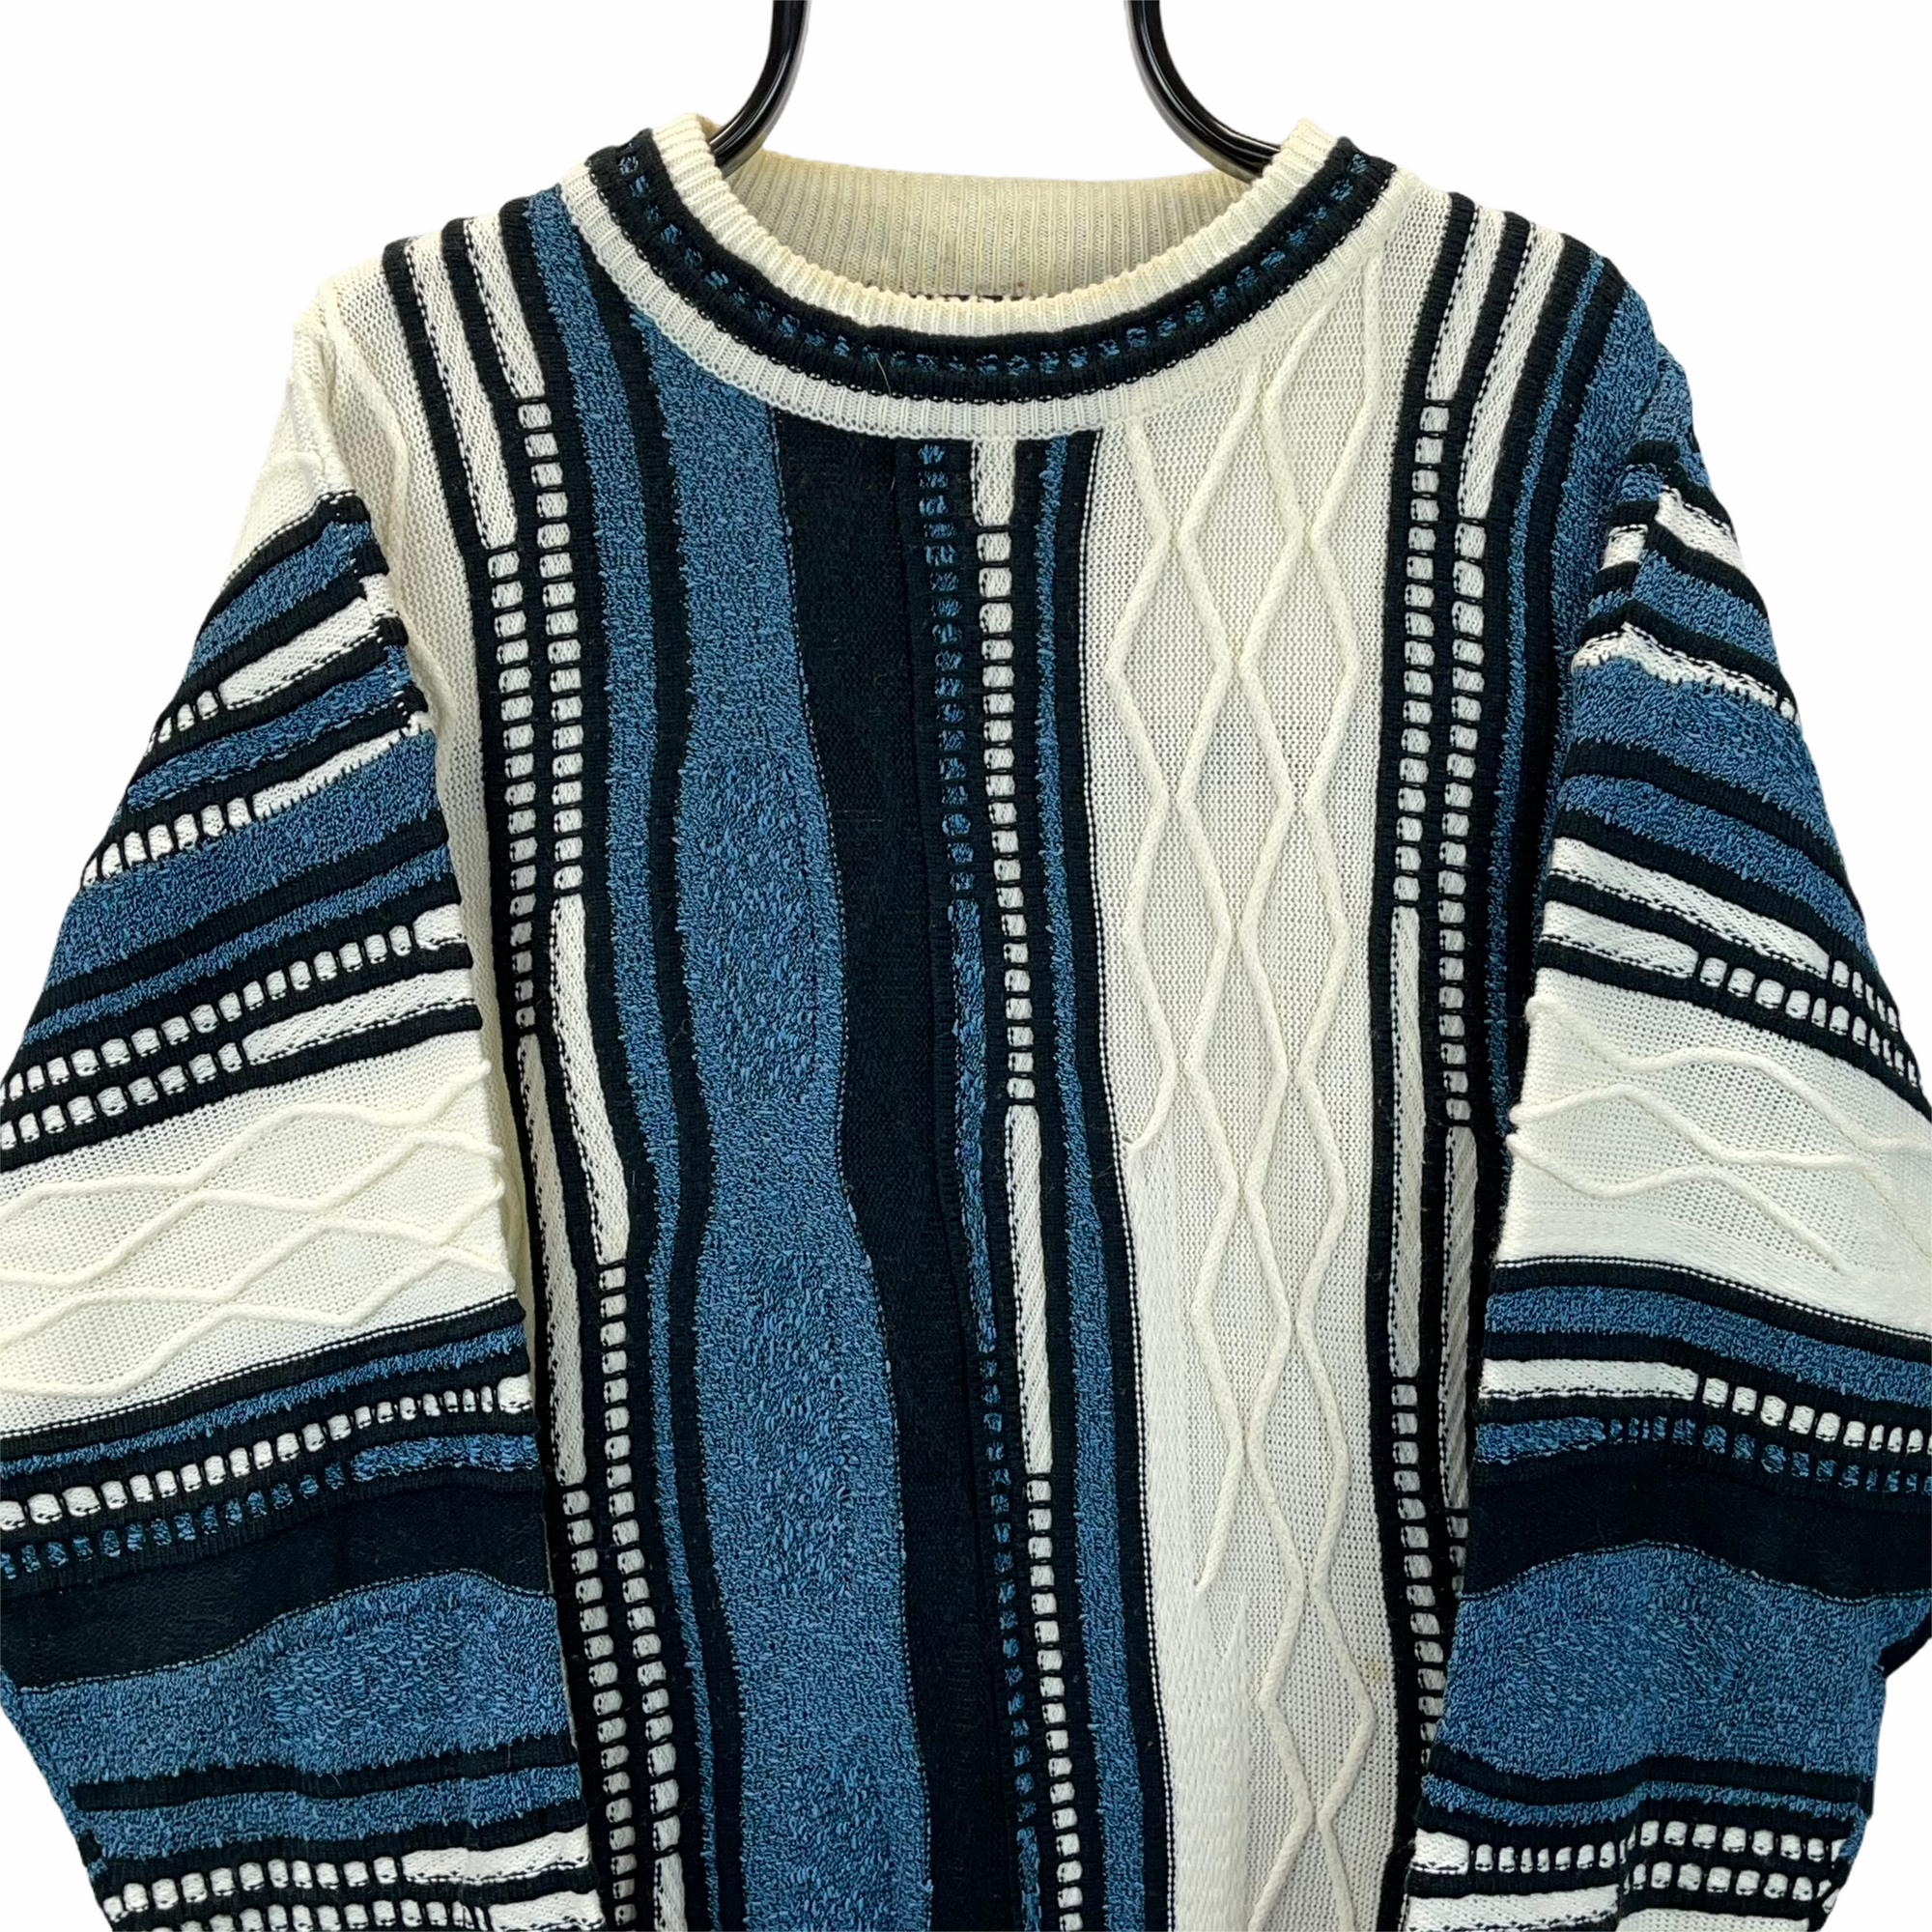 Vintage Coogi-Style Sweater in Blue & Cream - Men's Large/Women's XL